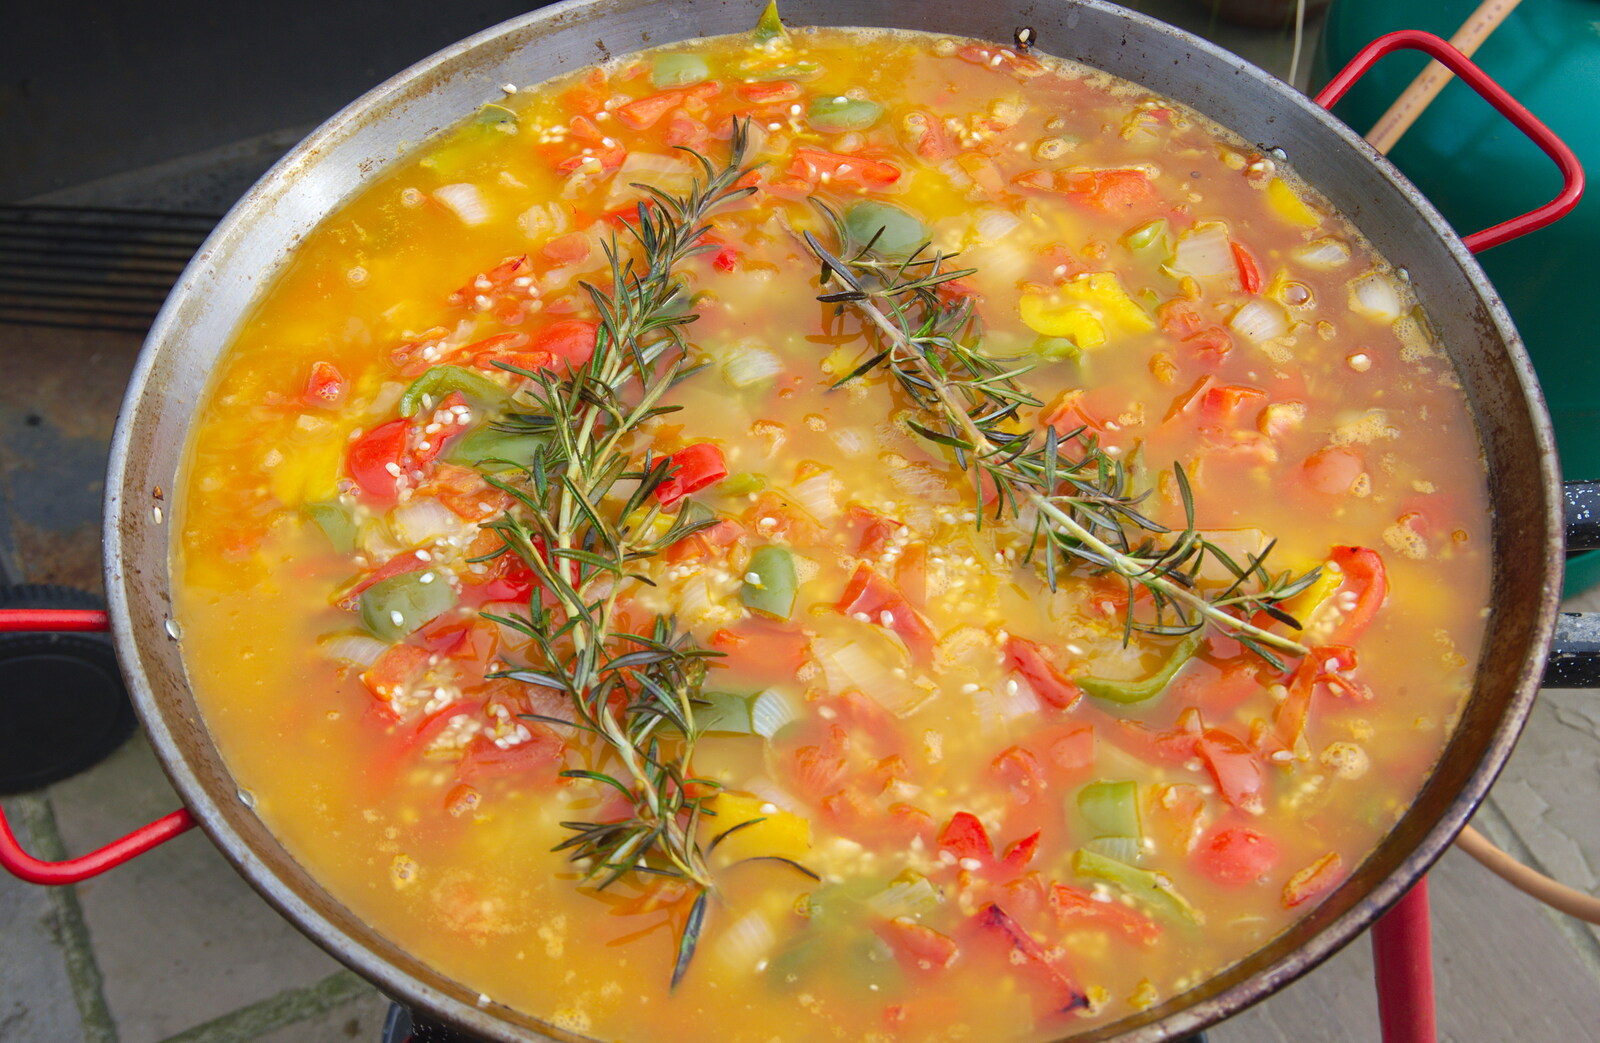 The paella gets some fresh rosemary added from A Summer Party, Brome, Suffolk - 3rd August 2019